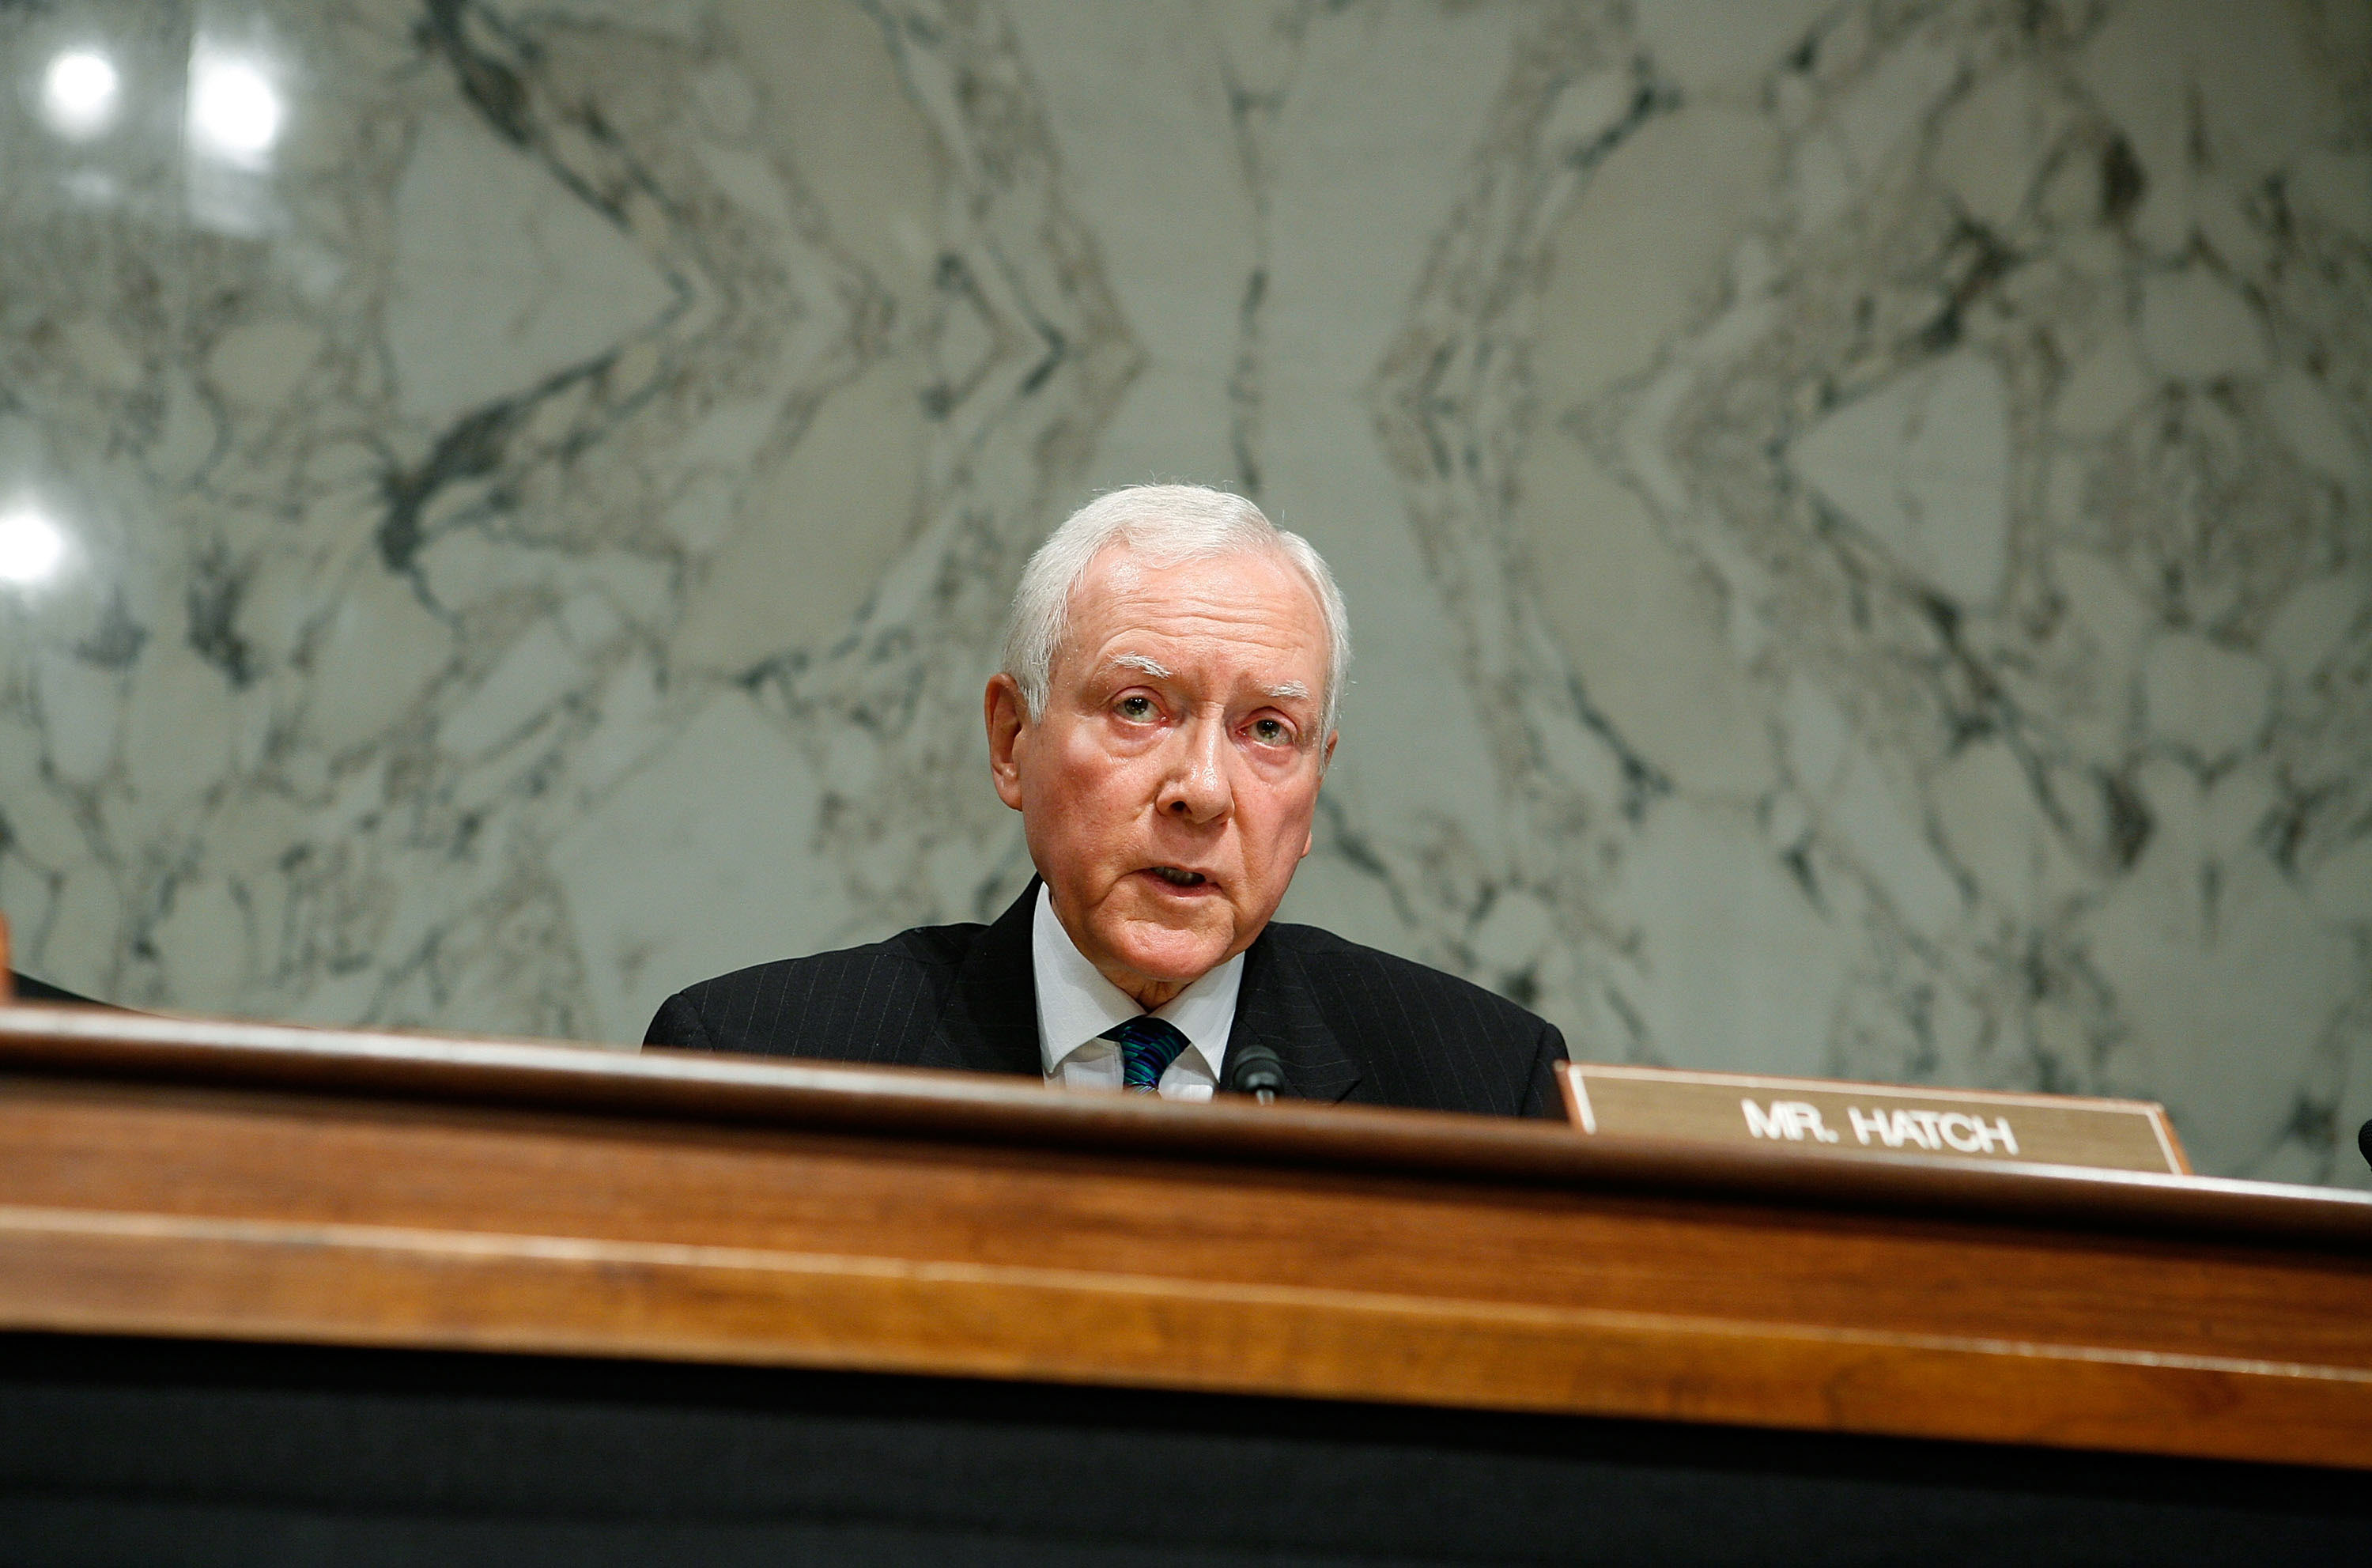 U.S. Sen. Orrin Hatch (R-UT) speaks during a mark up hearing before the Senate Finance Committee on Capitol Hill in Washington, DC., on Sept. 23, 2009.